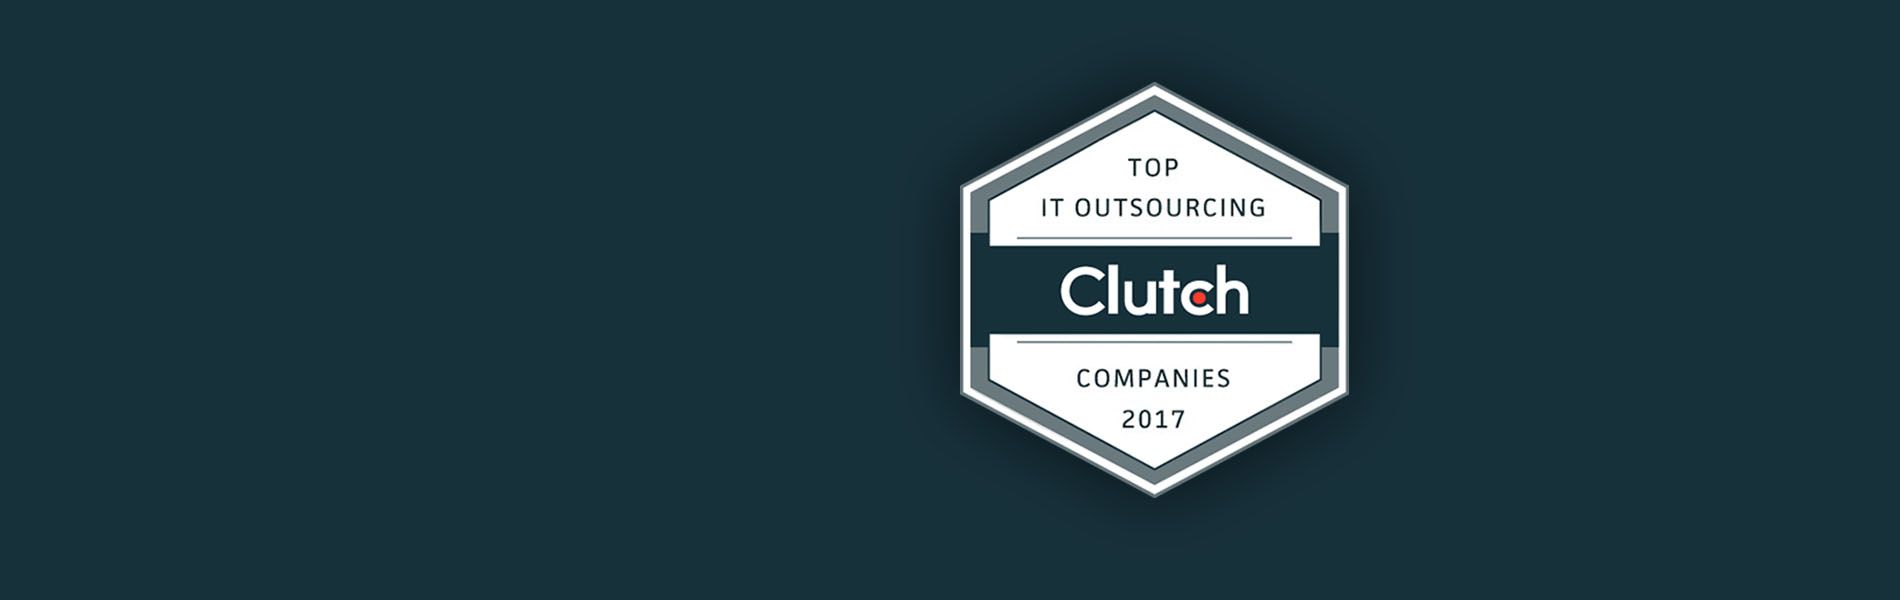 top it outsourcing companies